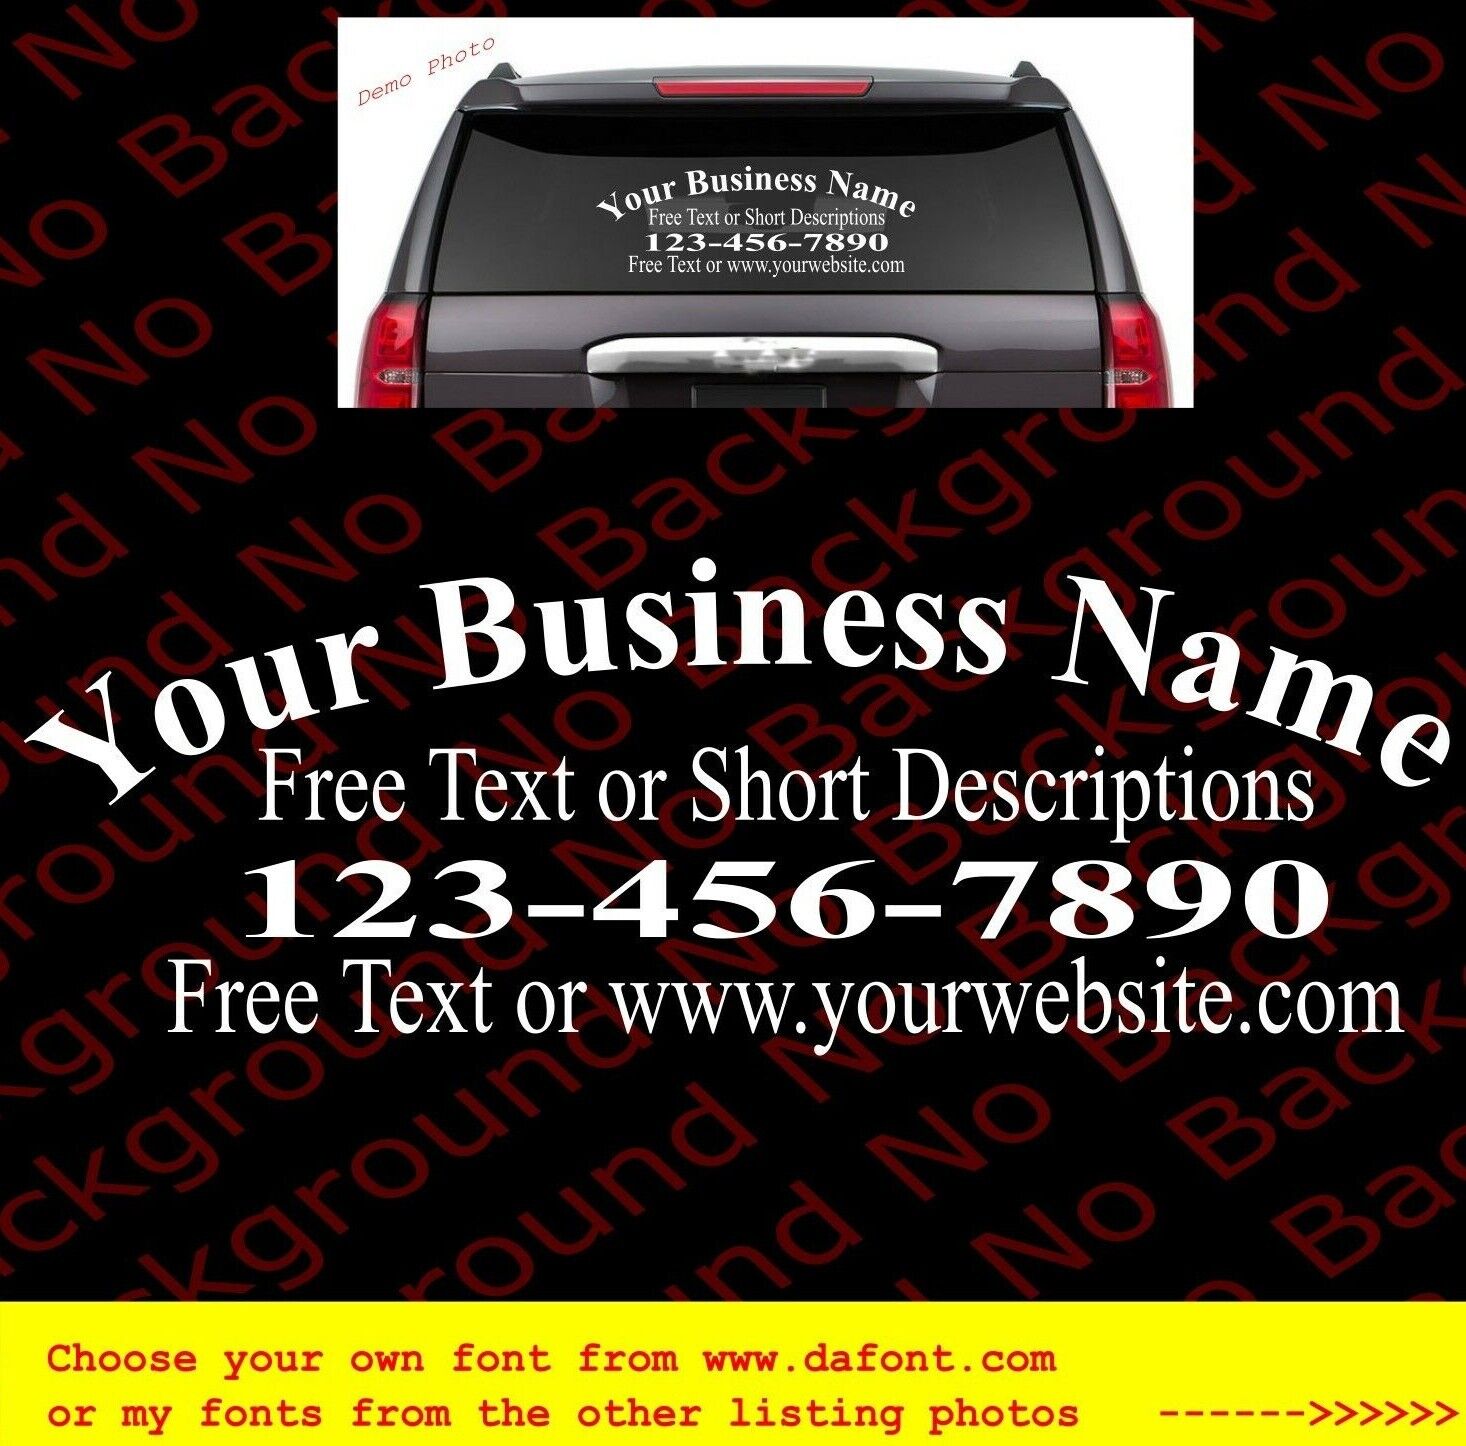 Curved Custom Business Company Name Information Car Window Vinyl Decal BS018